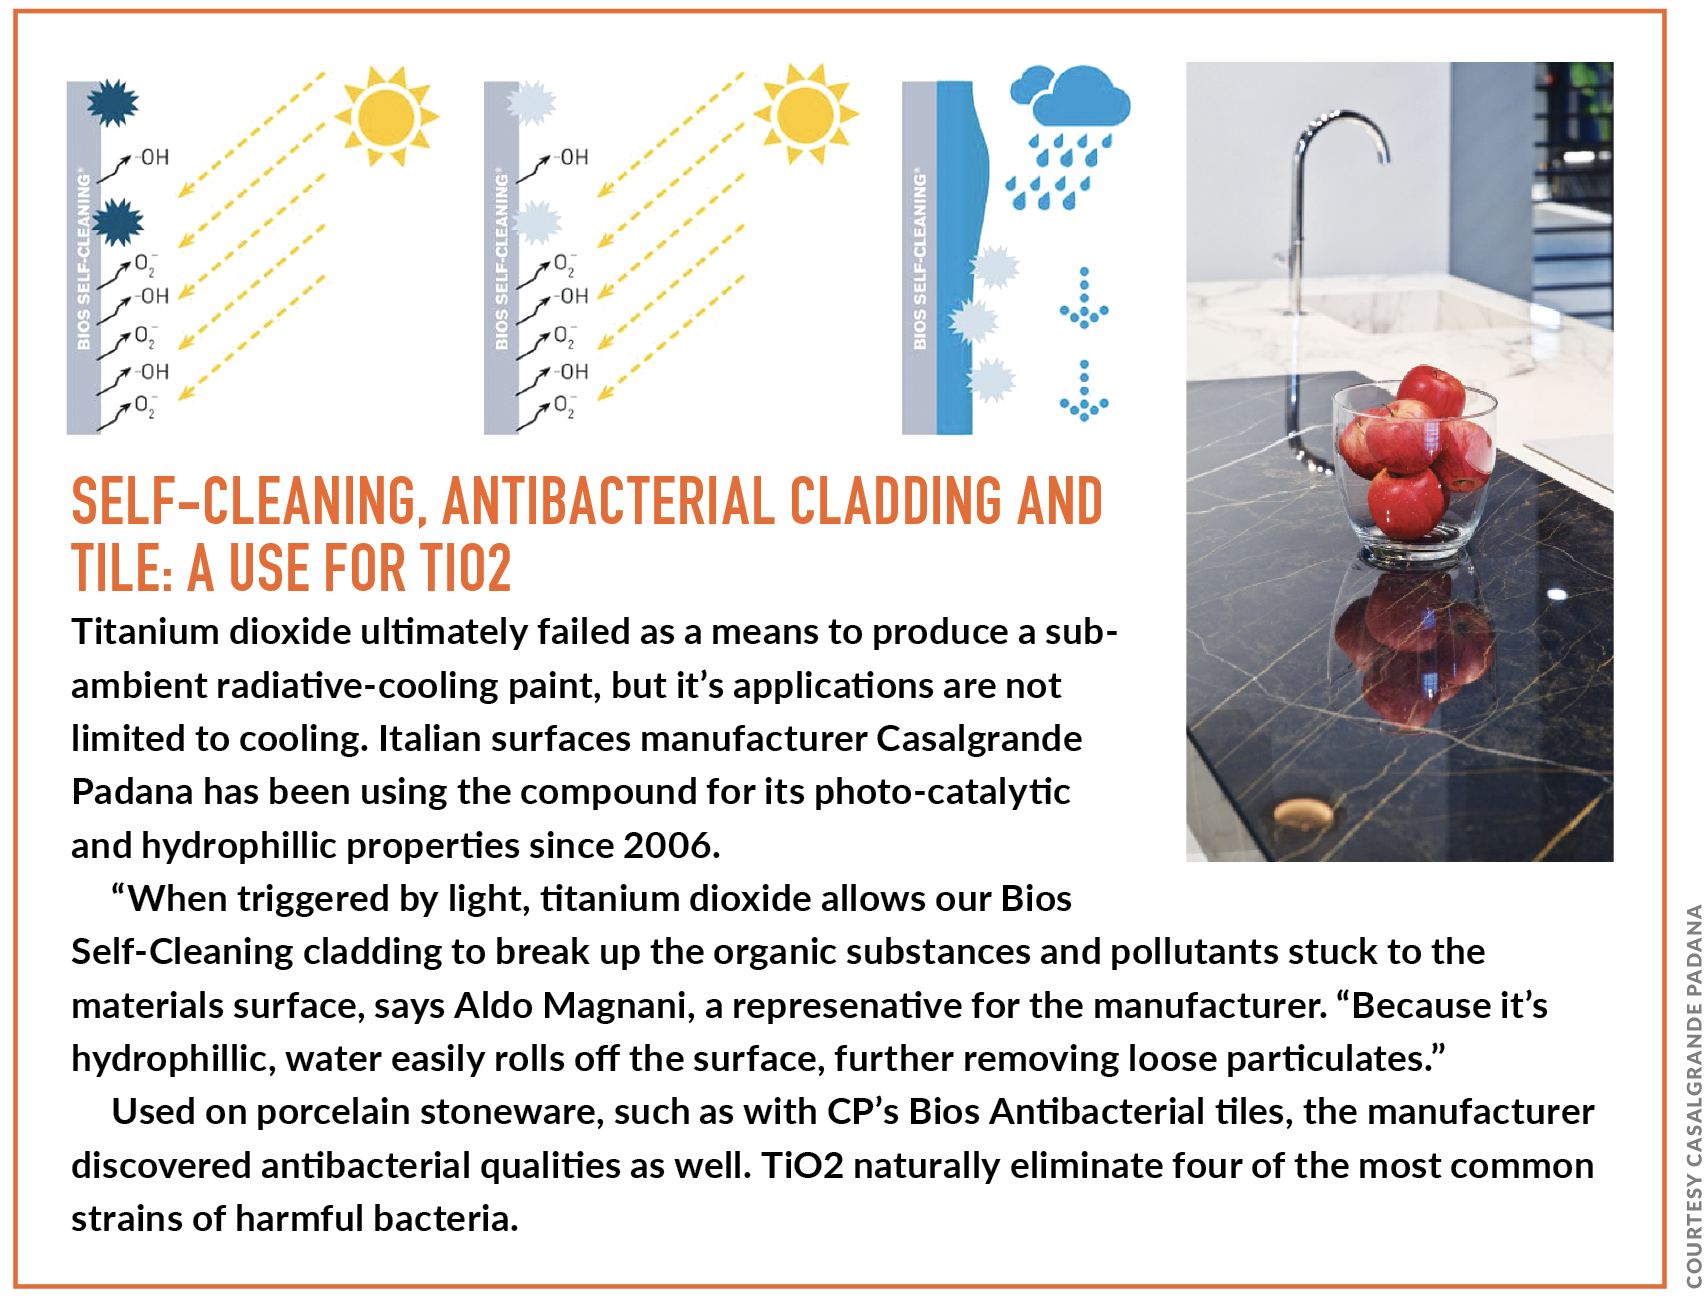 Self-cleaning antibacterial cladding